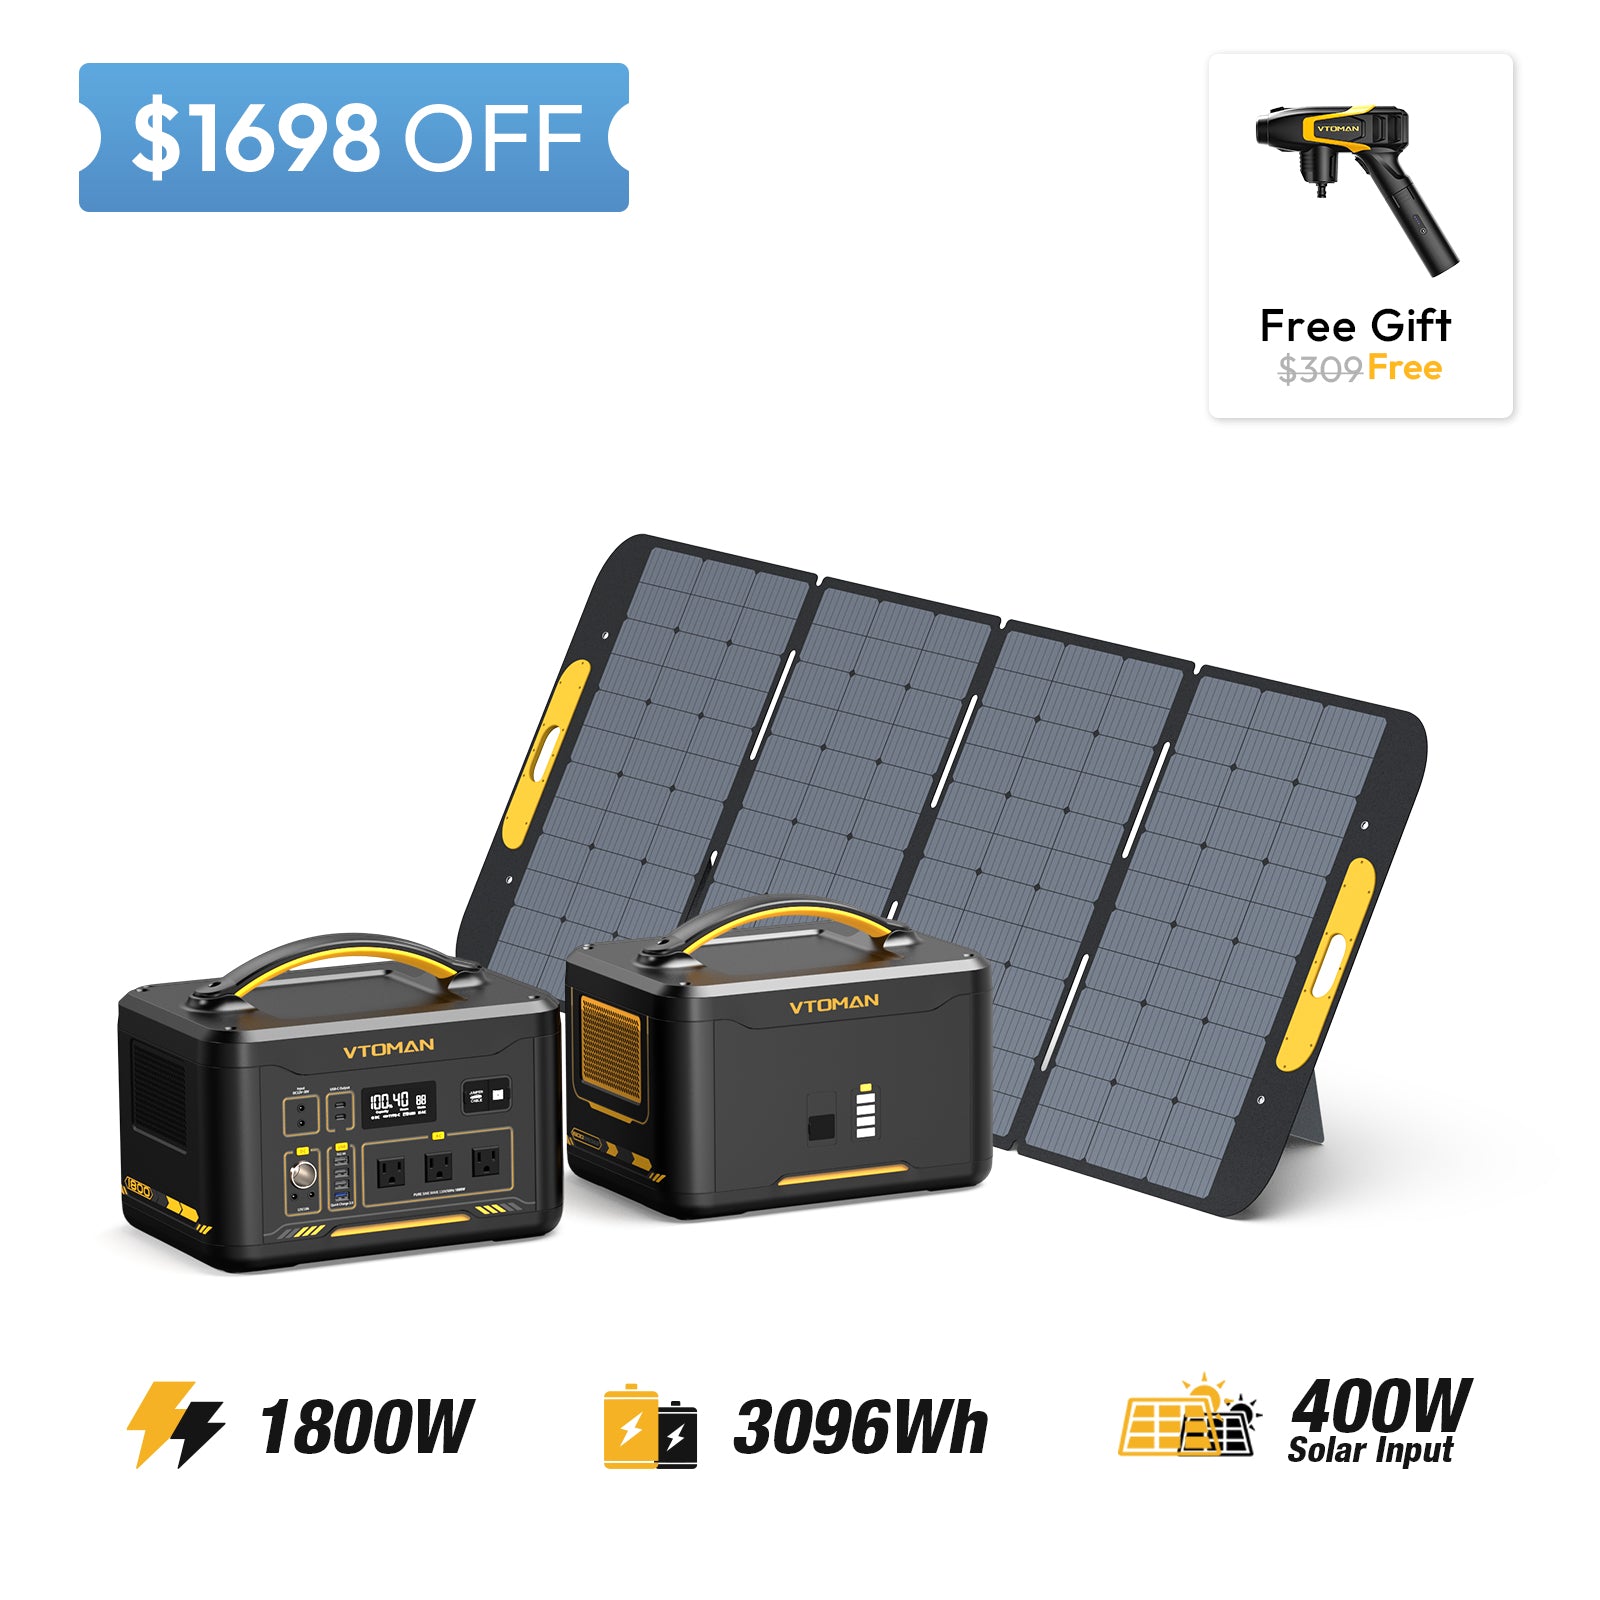 Jump 1800 and 1548Wh extra battery and 400w soalr panel save $1698 in summer sale